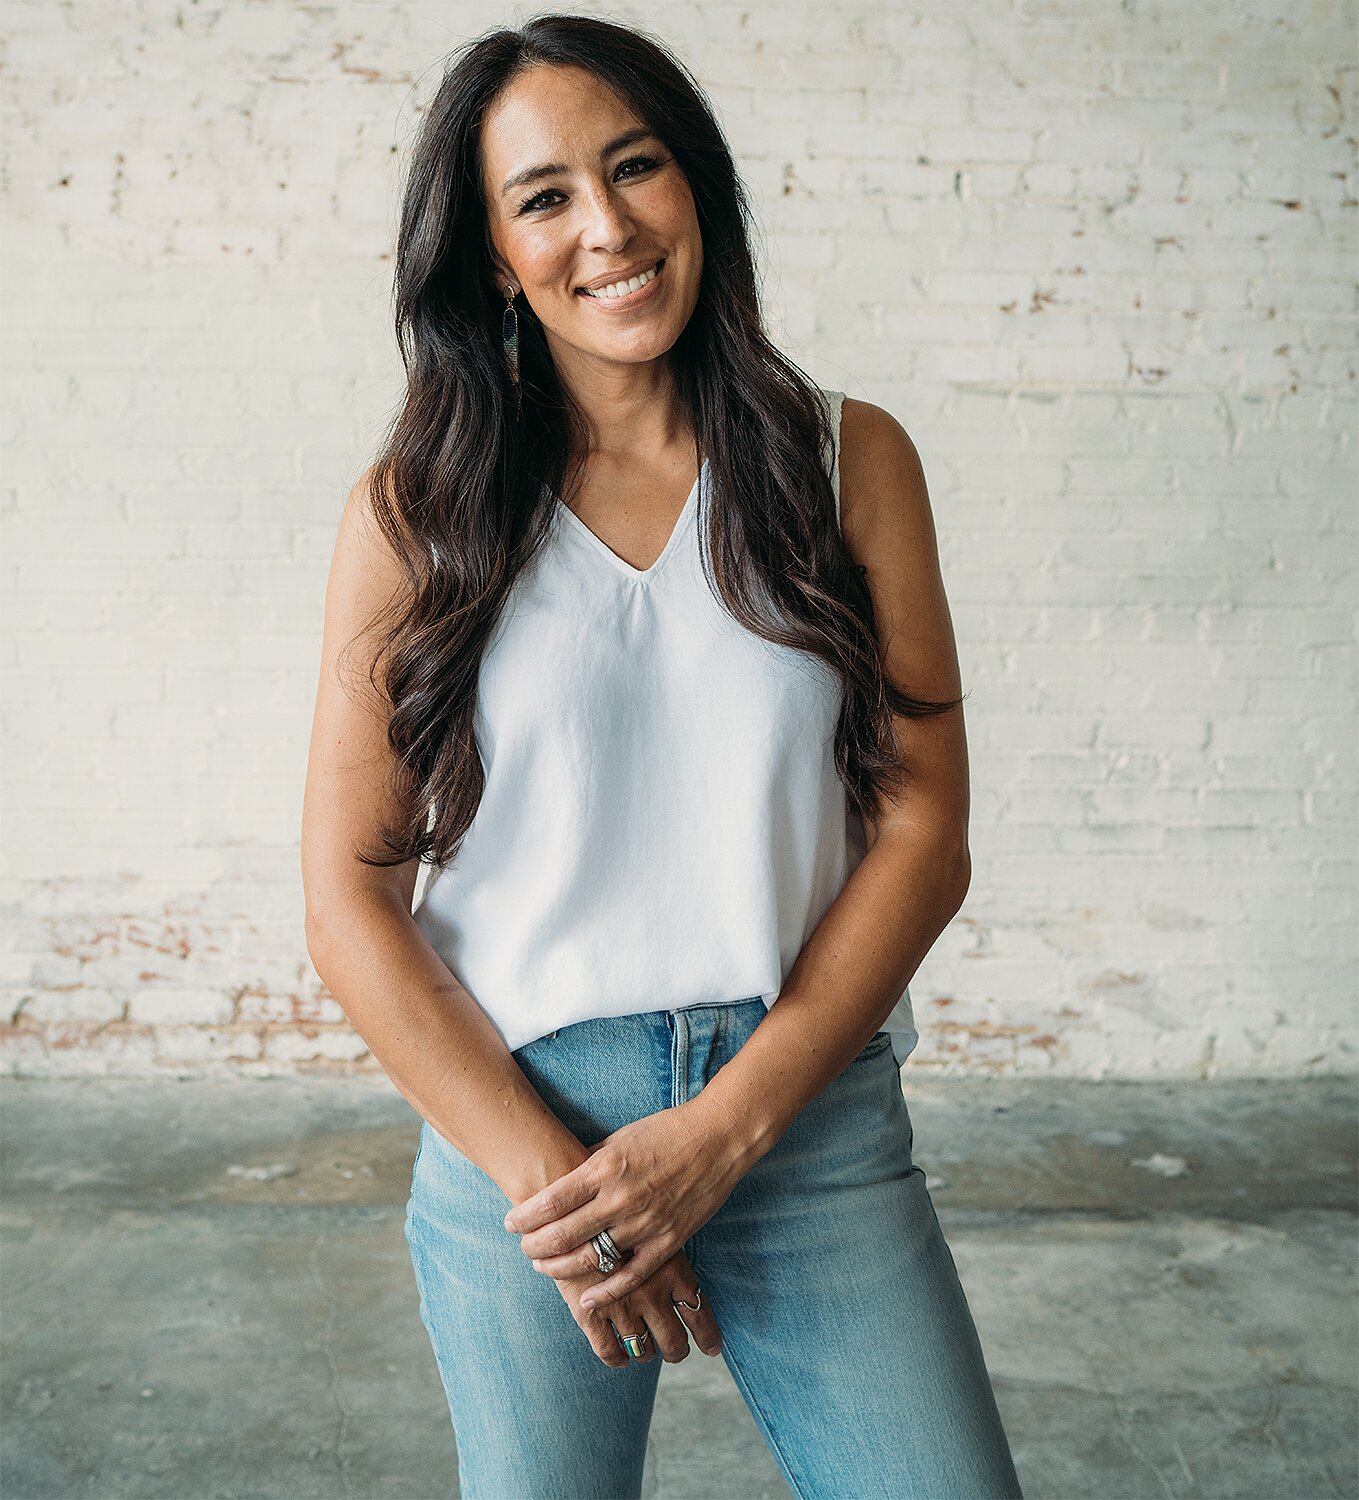 Joanna Gaines Unveils There Is One Aspect Of Fame, Chip Gaines Is A 'Much Better' Handler Than She Is